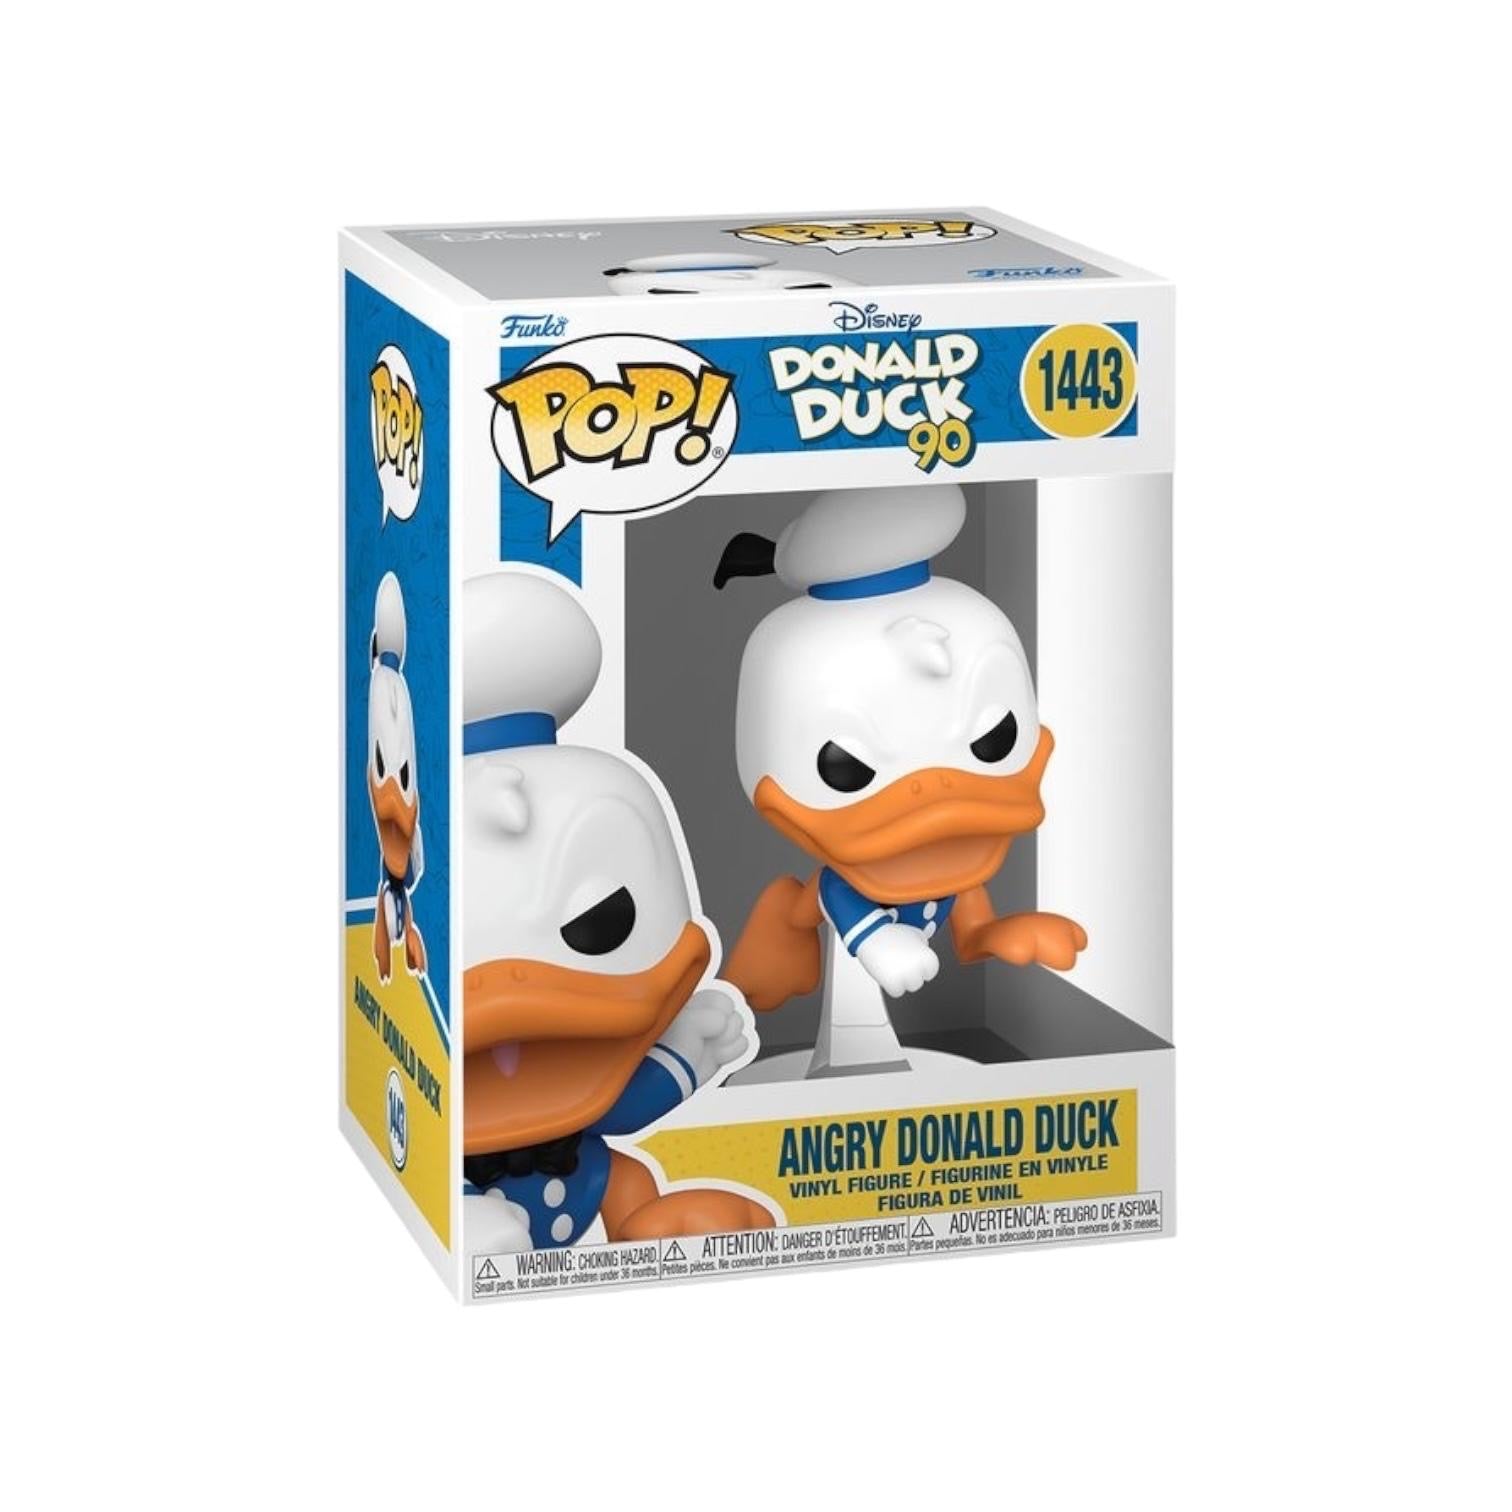 Angry Donald Duck #1443 Funko Pop! - Donald Duck 90th - Disney